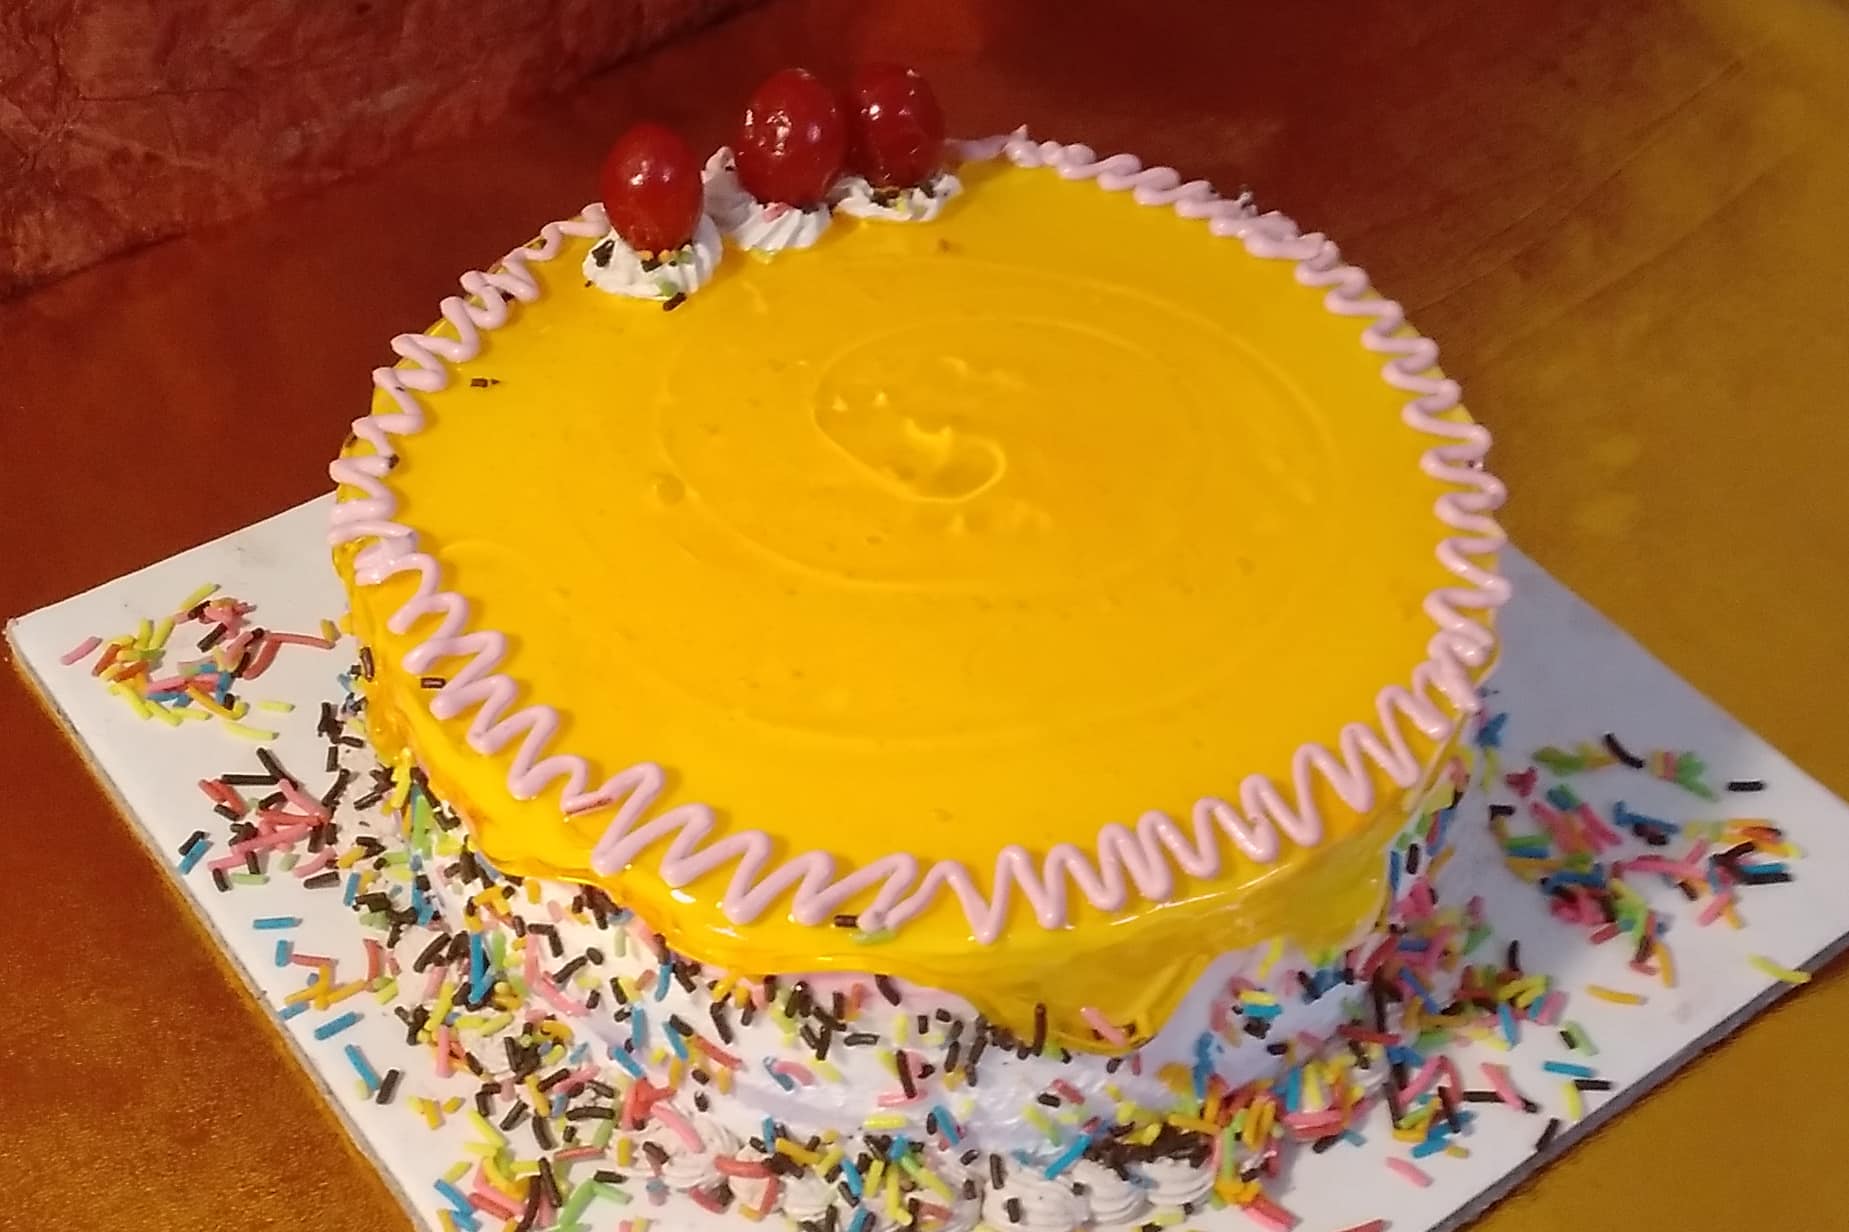 TANGY MANGO CAKE – The Ultimate Online Cake Destination